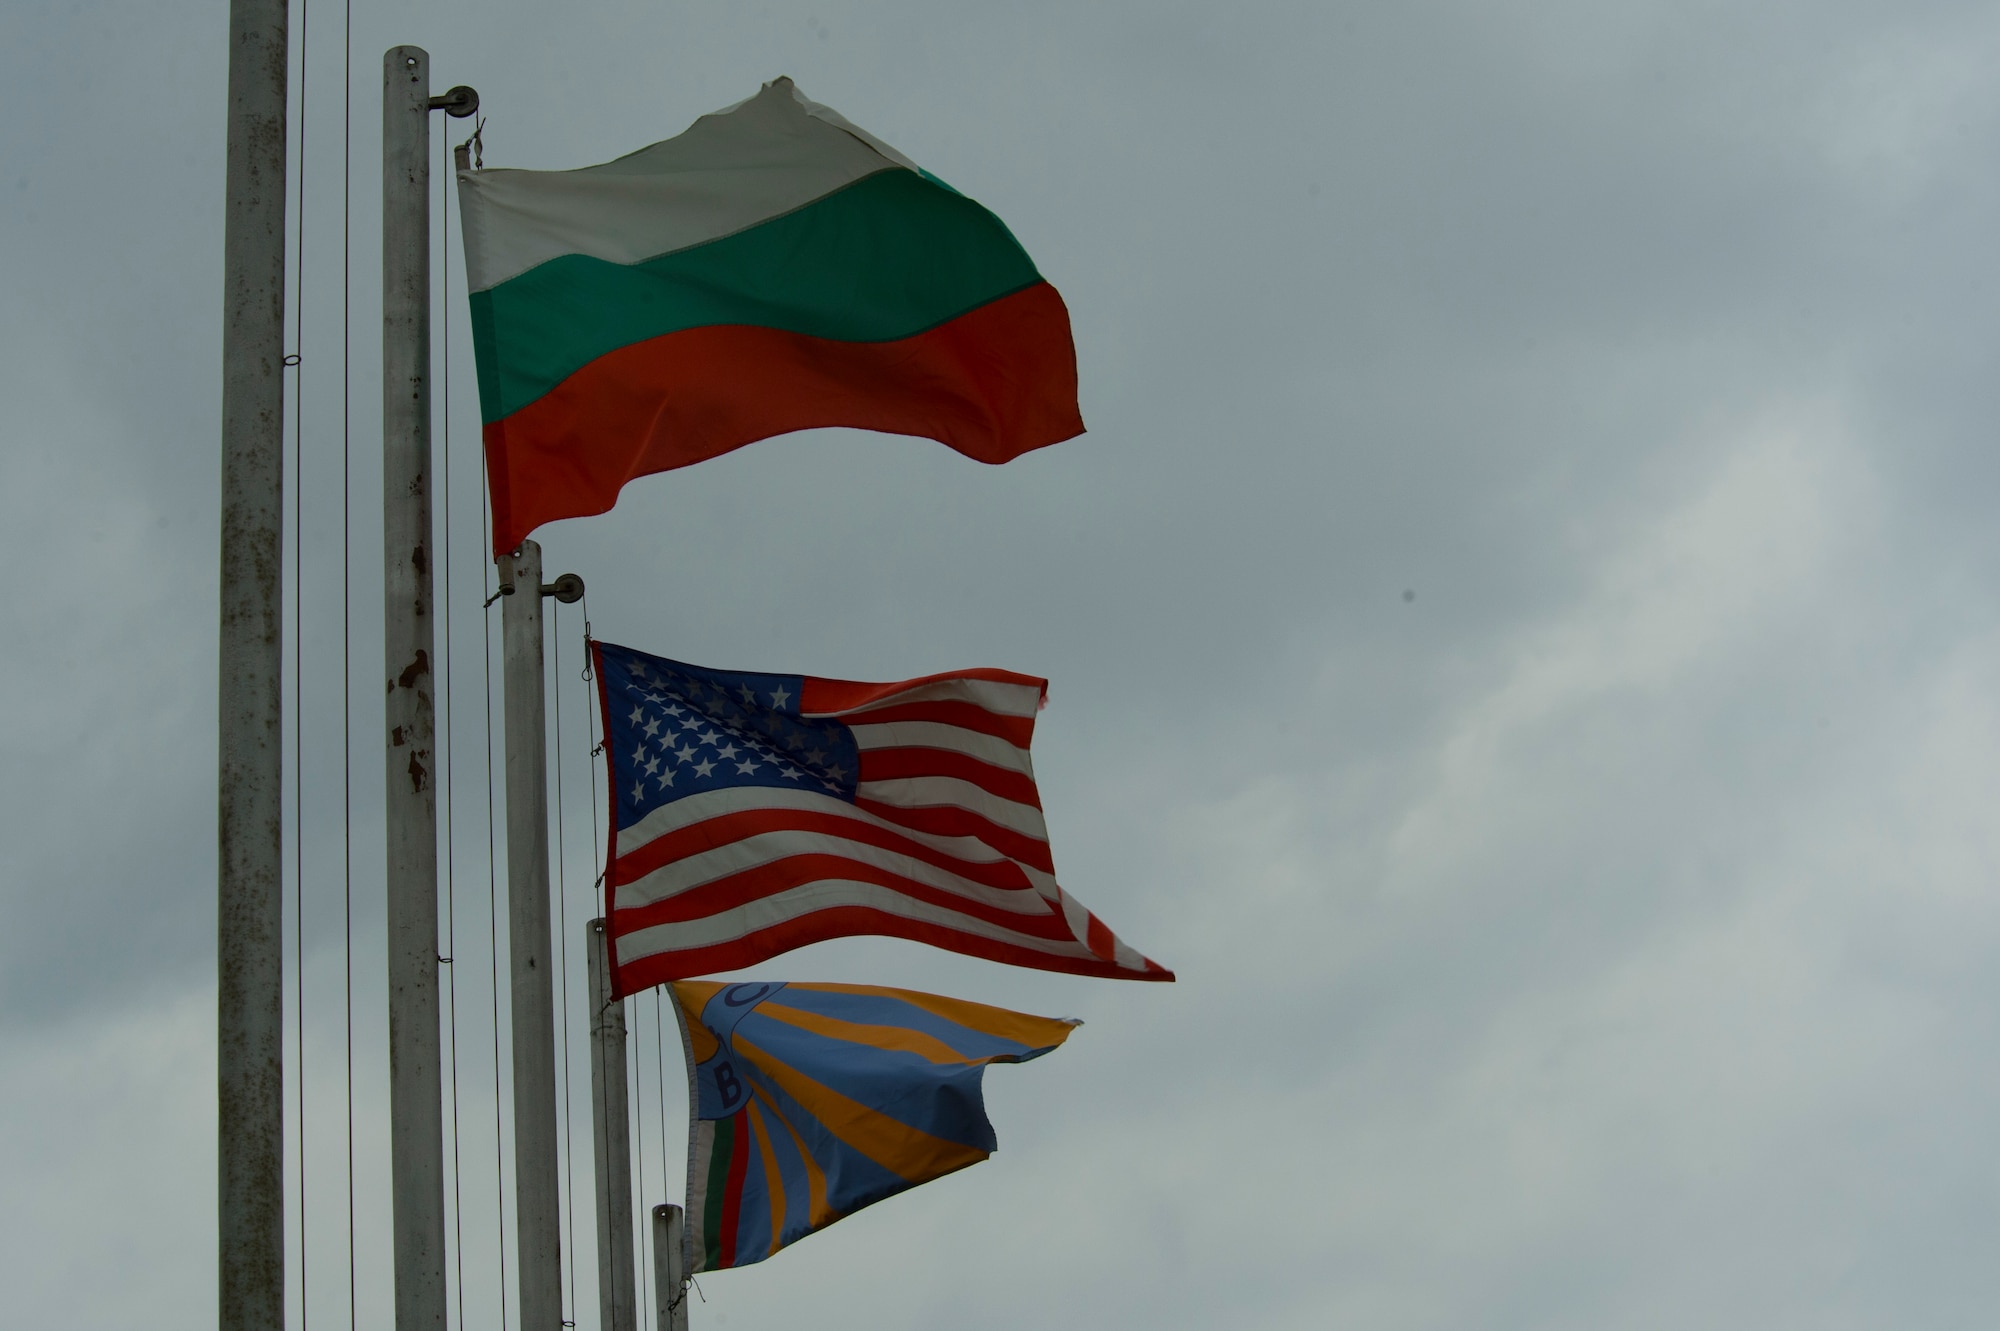 The Bulgarian and United States flags wave on flagpoles outside the Bulgarian air force 3rd Air Force Base headquarters at Graf Ignatievo, Bulgaria, March 16, 2016. The Bulgarians hosted the U.S. Air Force’s 74th Expeditionary Fighter Squadron which completed a six-month deployment to Eastern Europe March 18, 2016, in support of Operation Atlantic Resolve. (U.S. Air Force photo by Staff Sgt. Joe W. McFadden/Released)